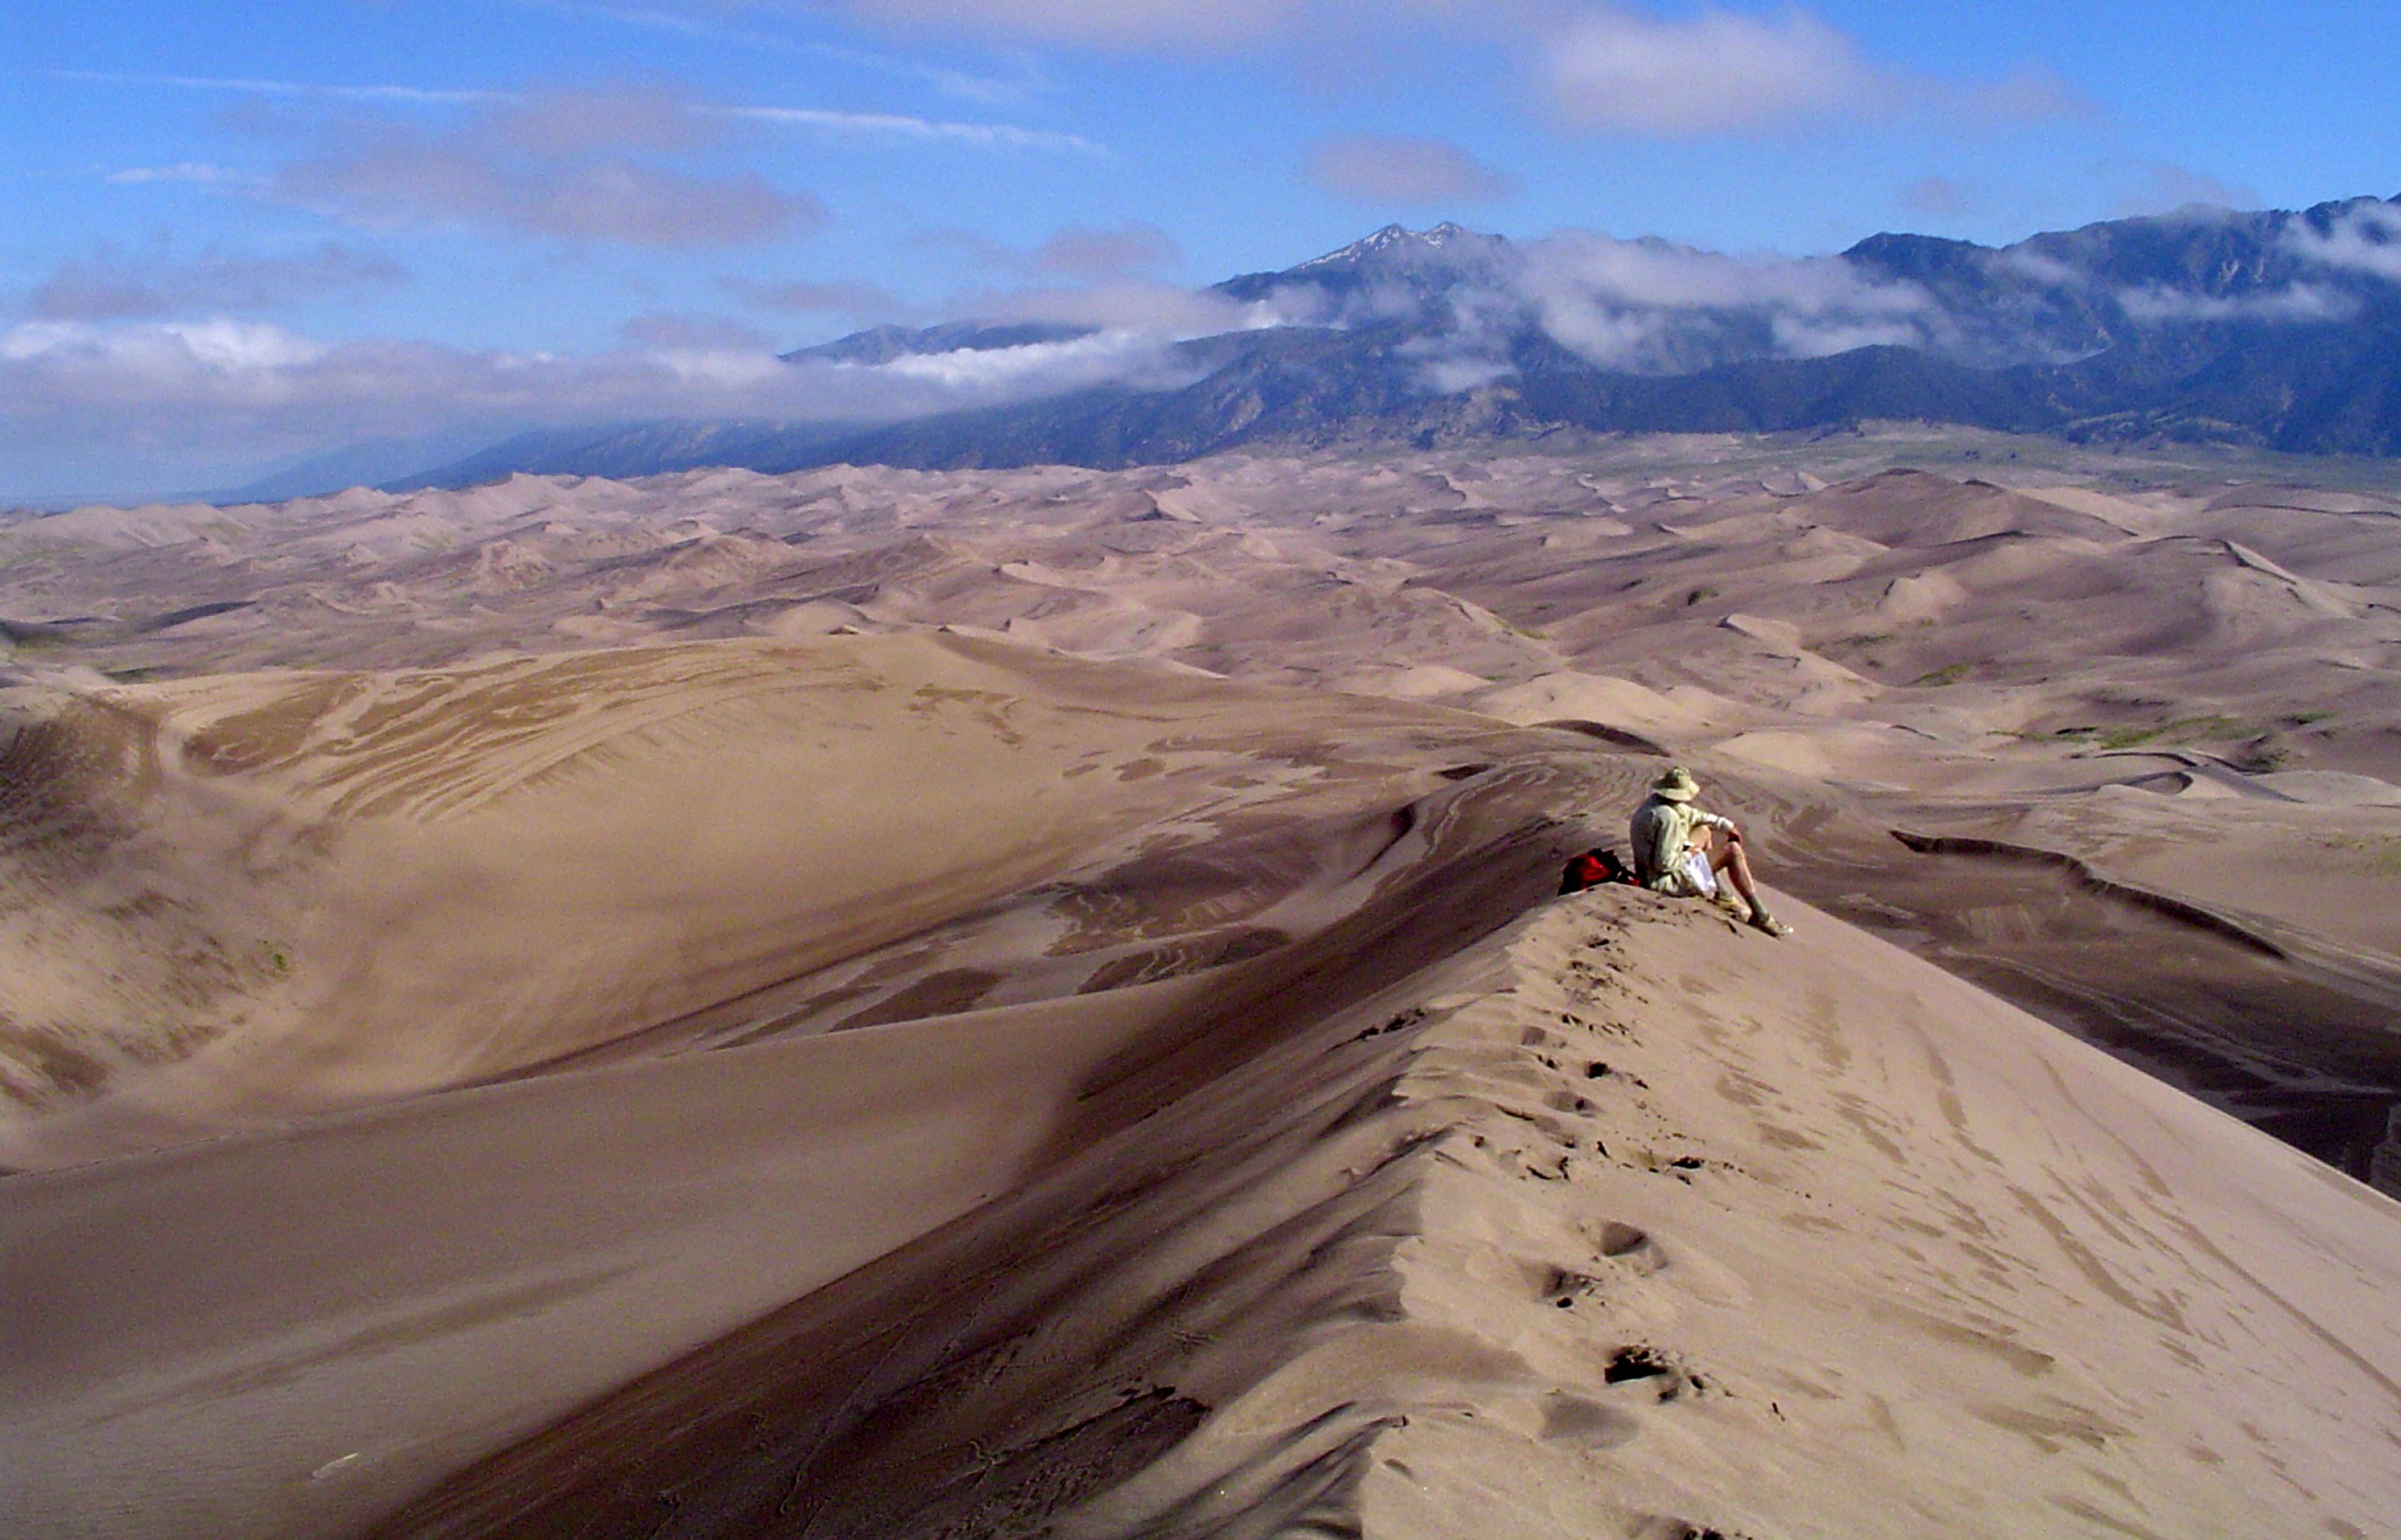 A solo hiker in Great Sand Dunes National Park in Colorado.